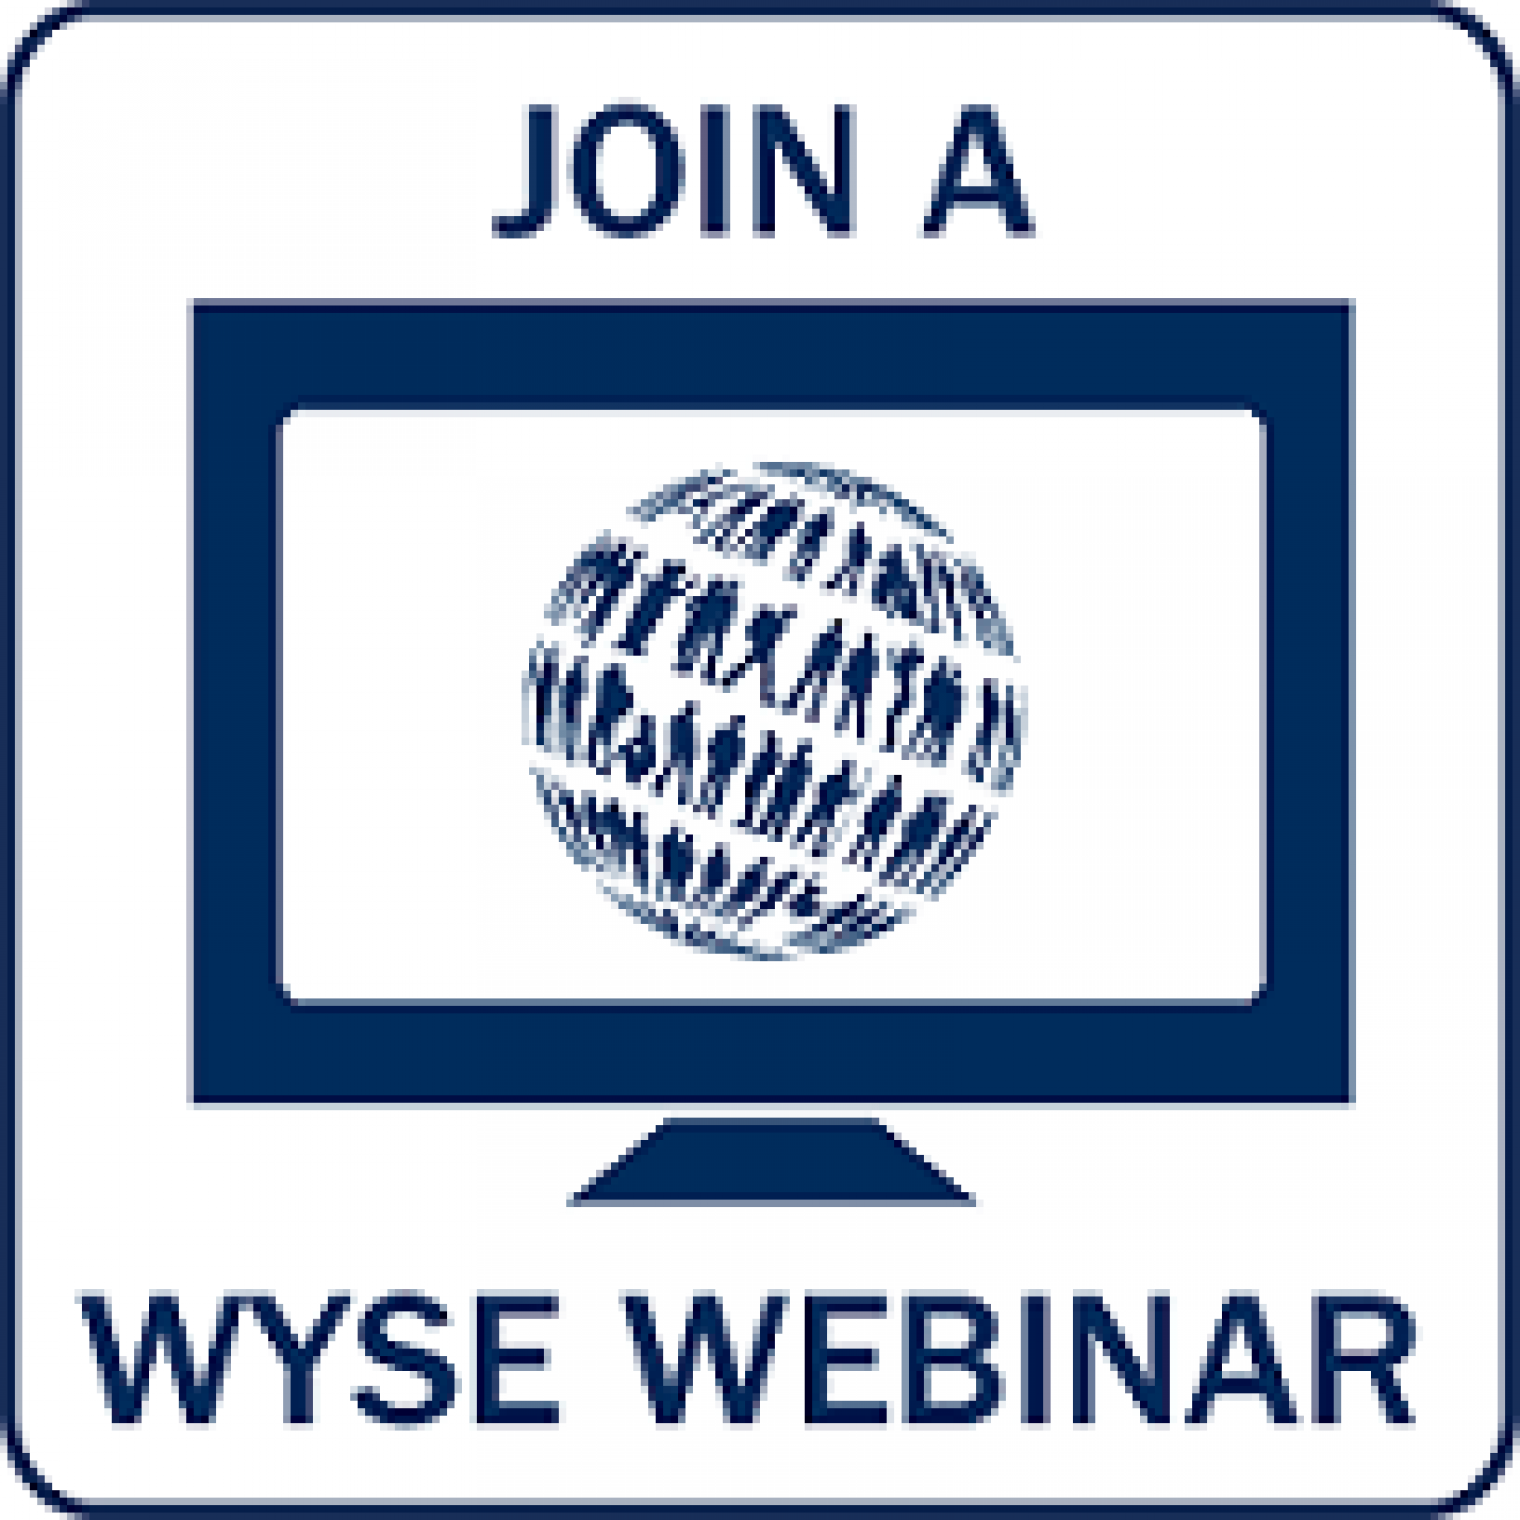 WYSE webinar – Sustainable youth tourism development webinar on 8 July – presented by Sustainable Travel International